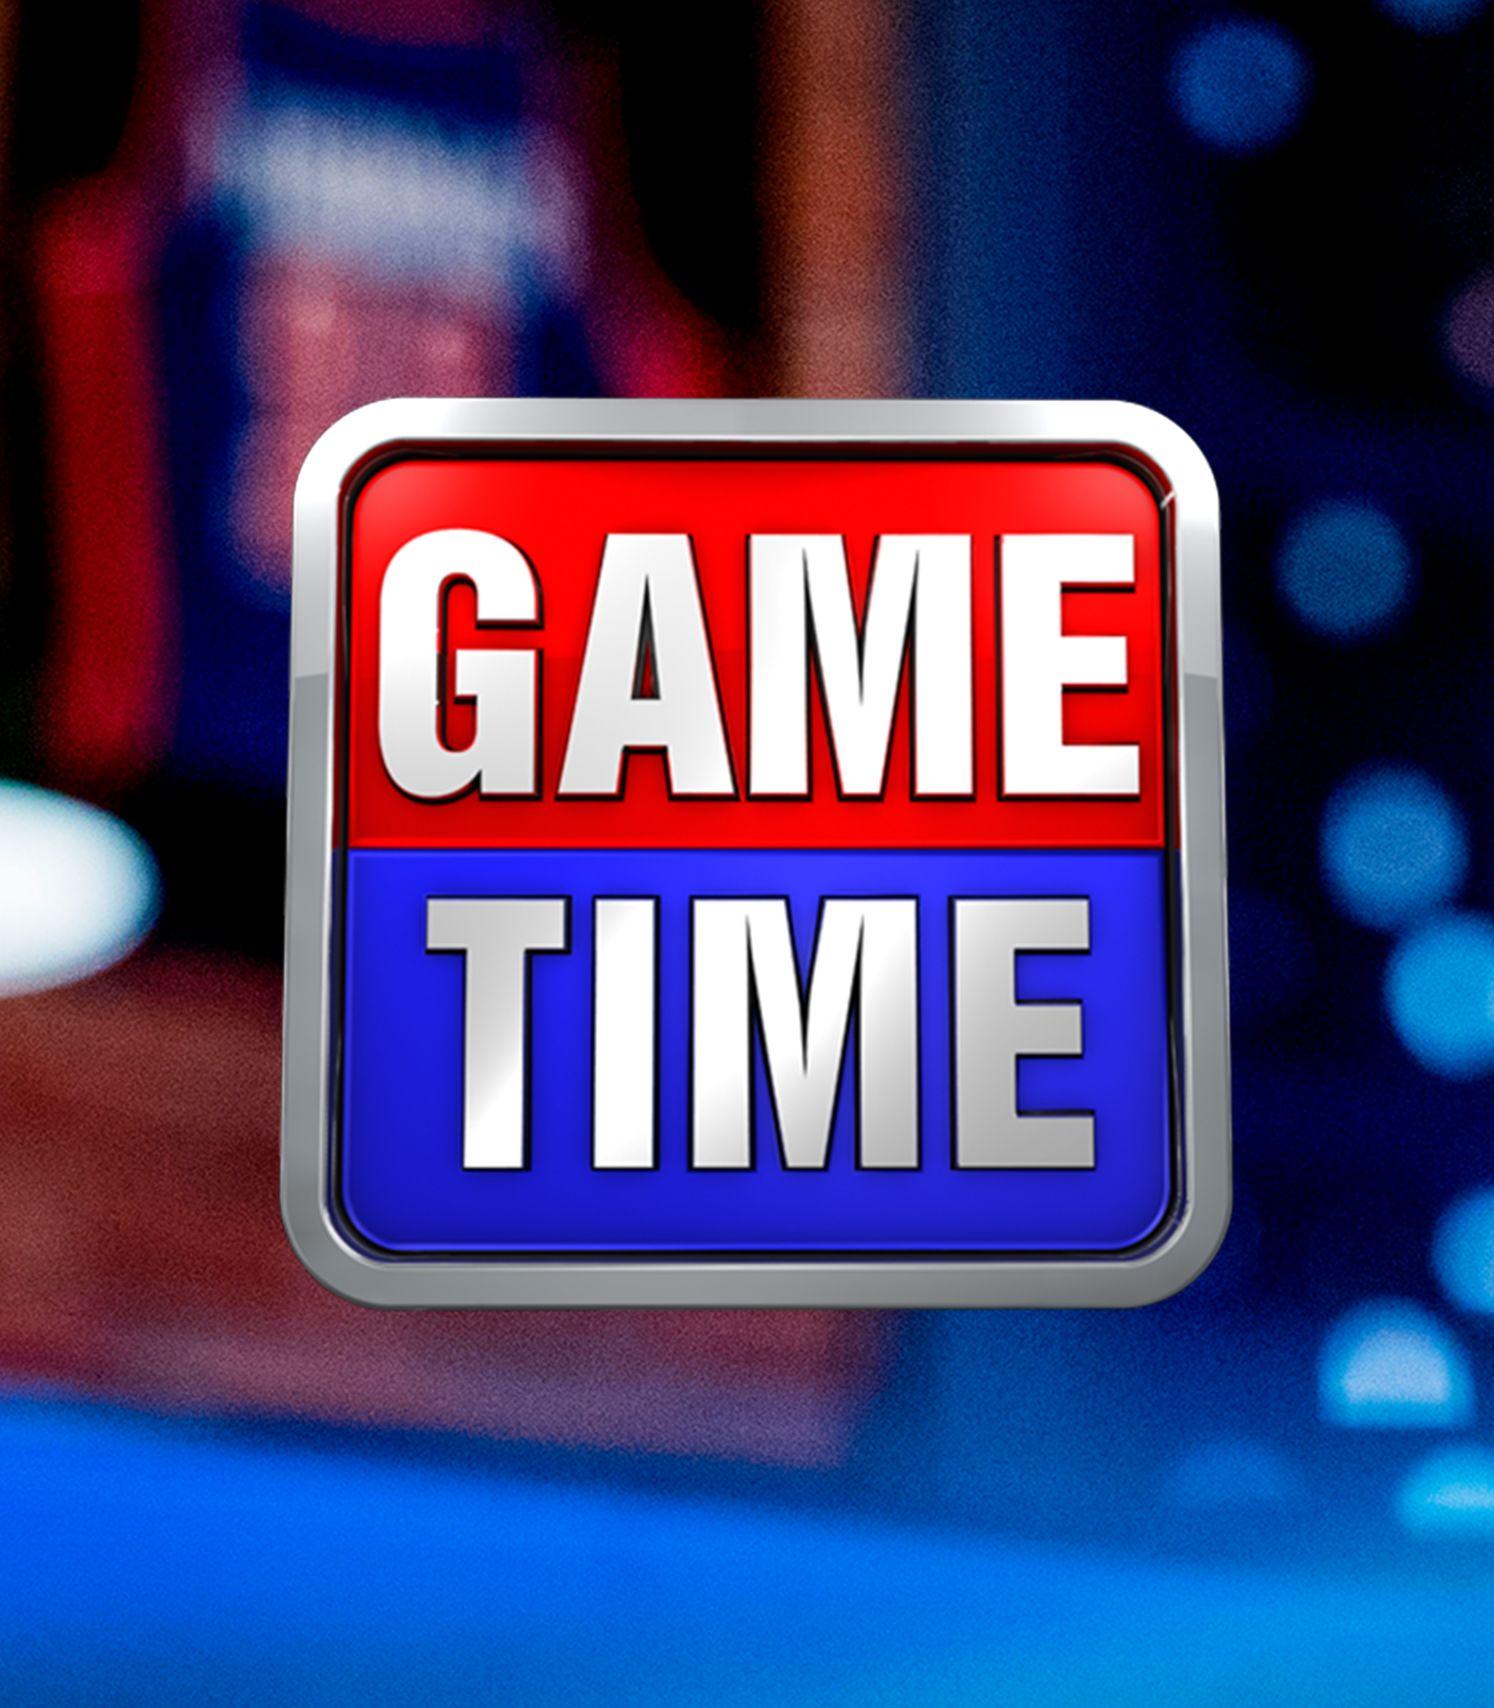 Game time перевод. Game time. Game time игра. Gametime картинки. Gaming time logo.